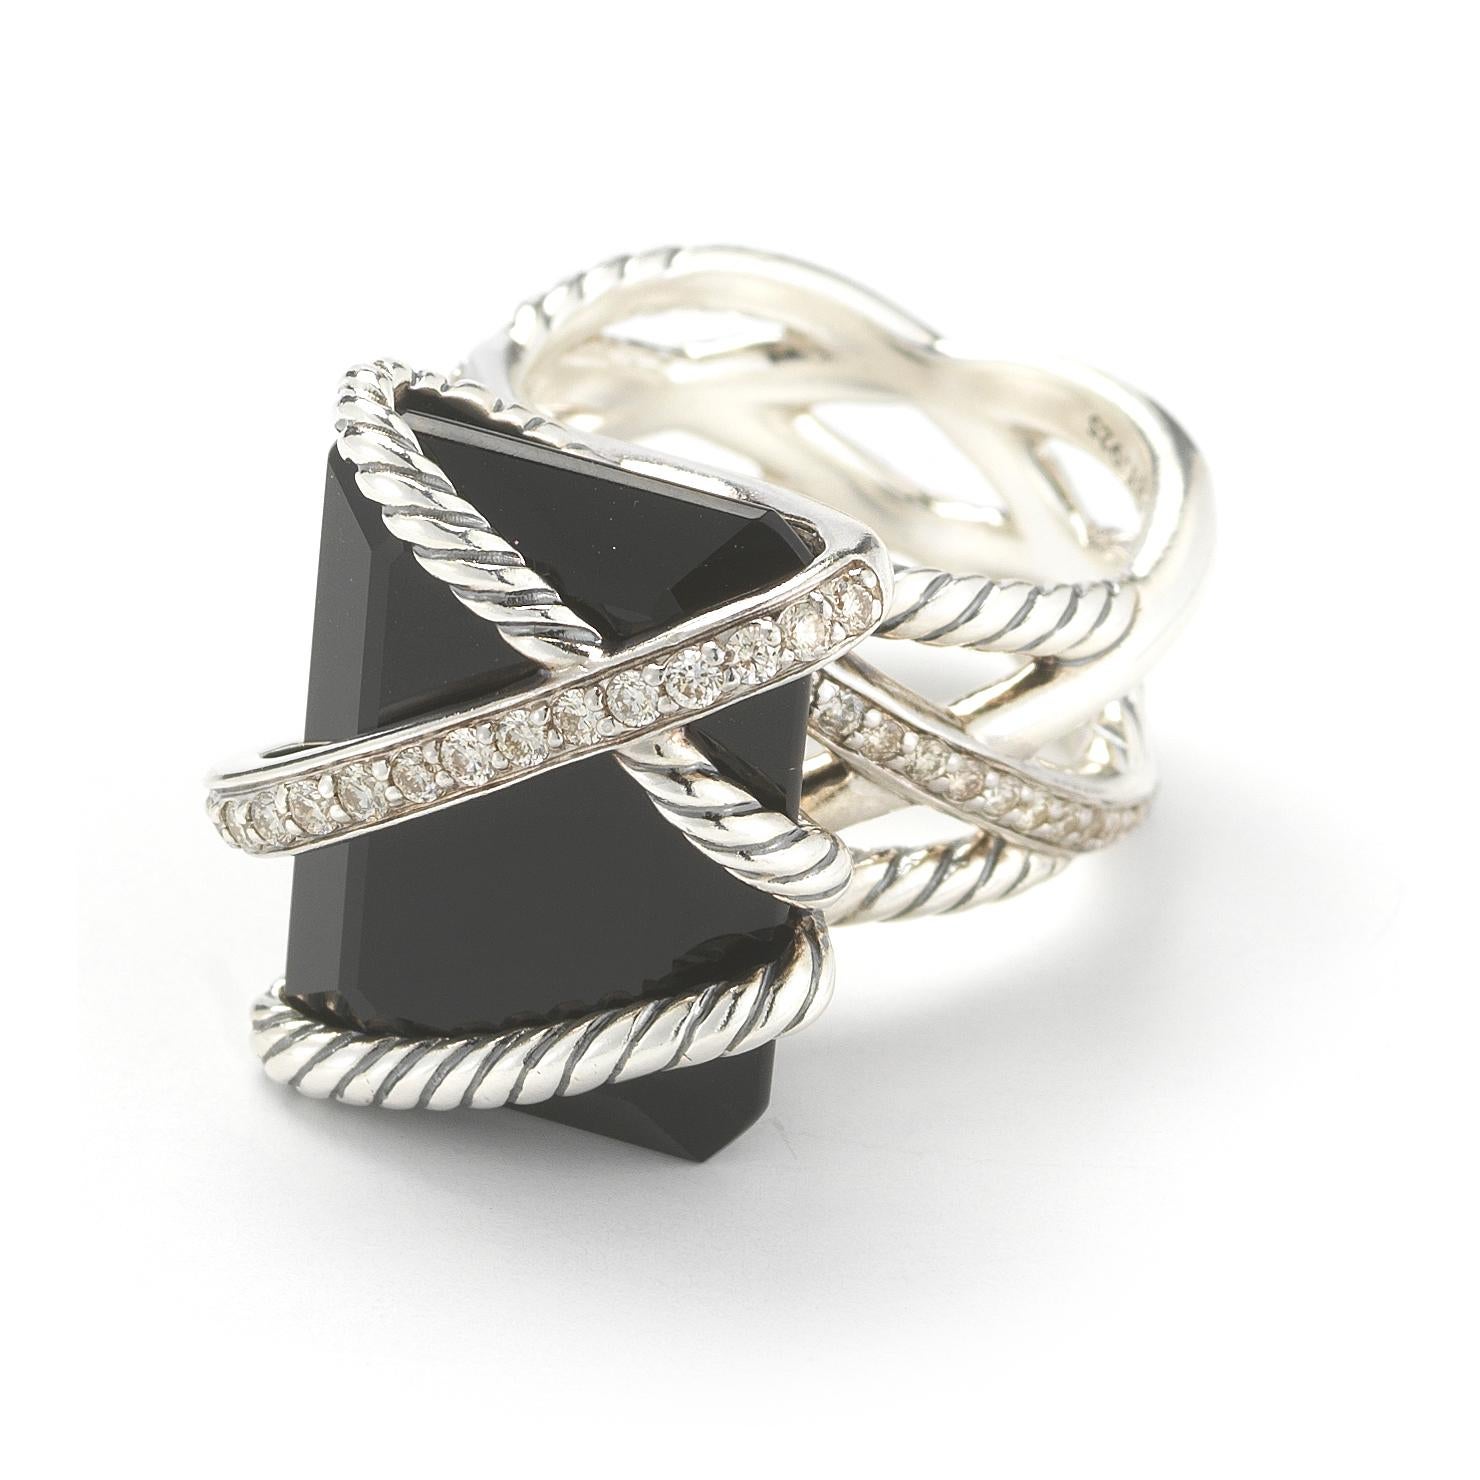 A David Yurman Cable Wrap cocktail ring featuring a 20 x 14.8mm emerald cut black onyx accented with silver wrap around details and a total of approximately 0.31 carats of round brilliant diamond accents mounted in sterling silver. Ring size 7.25